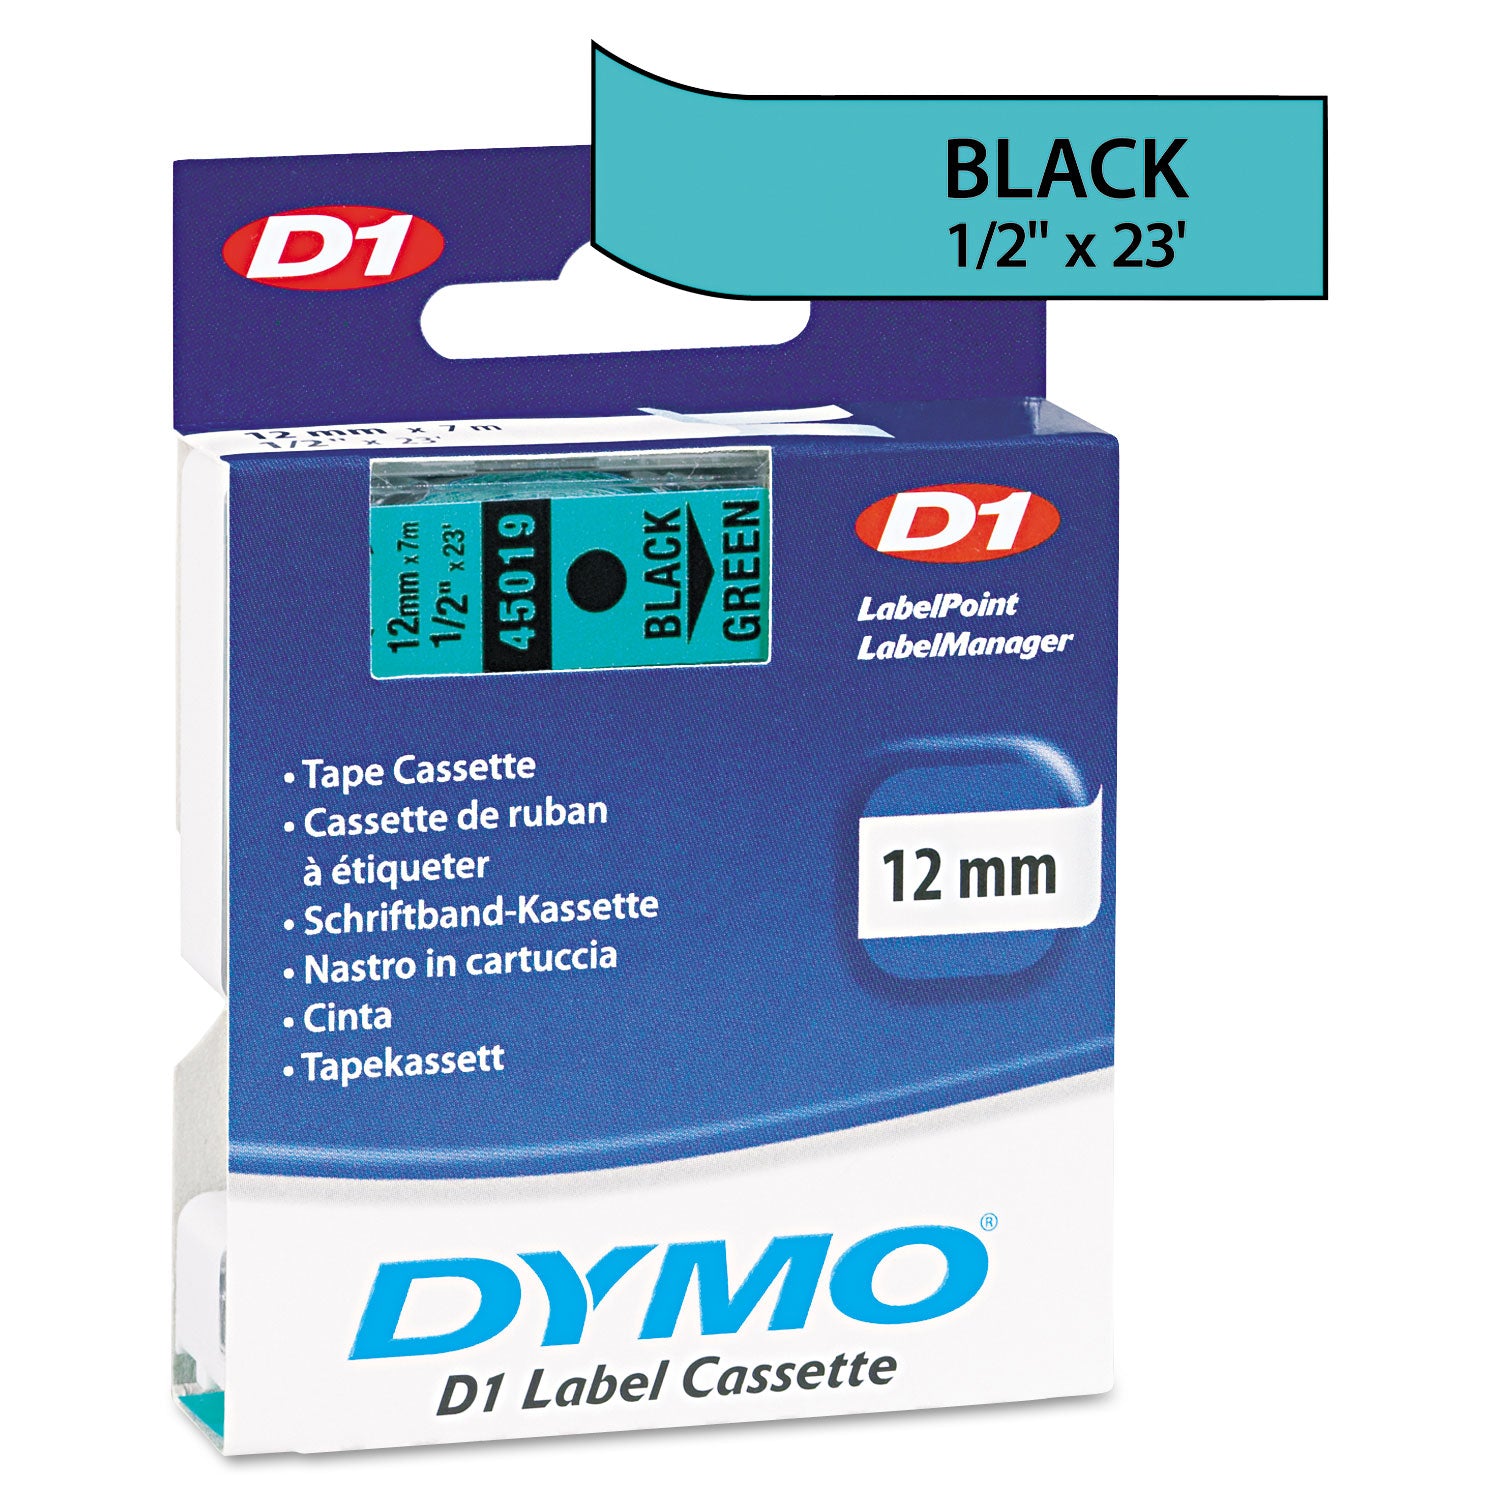 D1 High-Performance Polyester Removable Label Tape, 0.5" x 23 ft, Black on Green - 